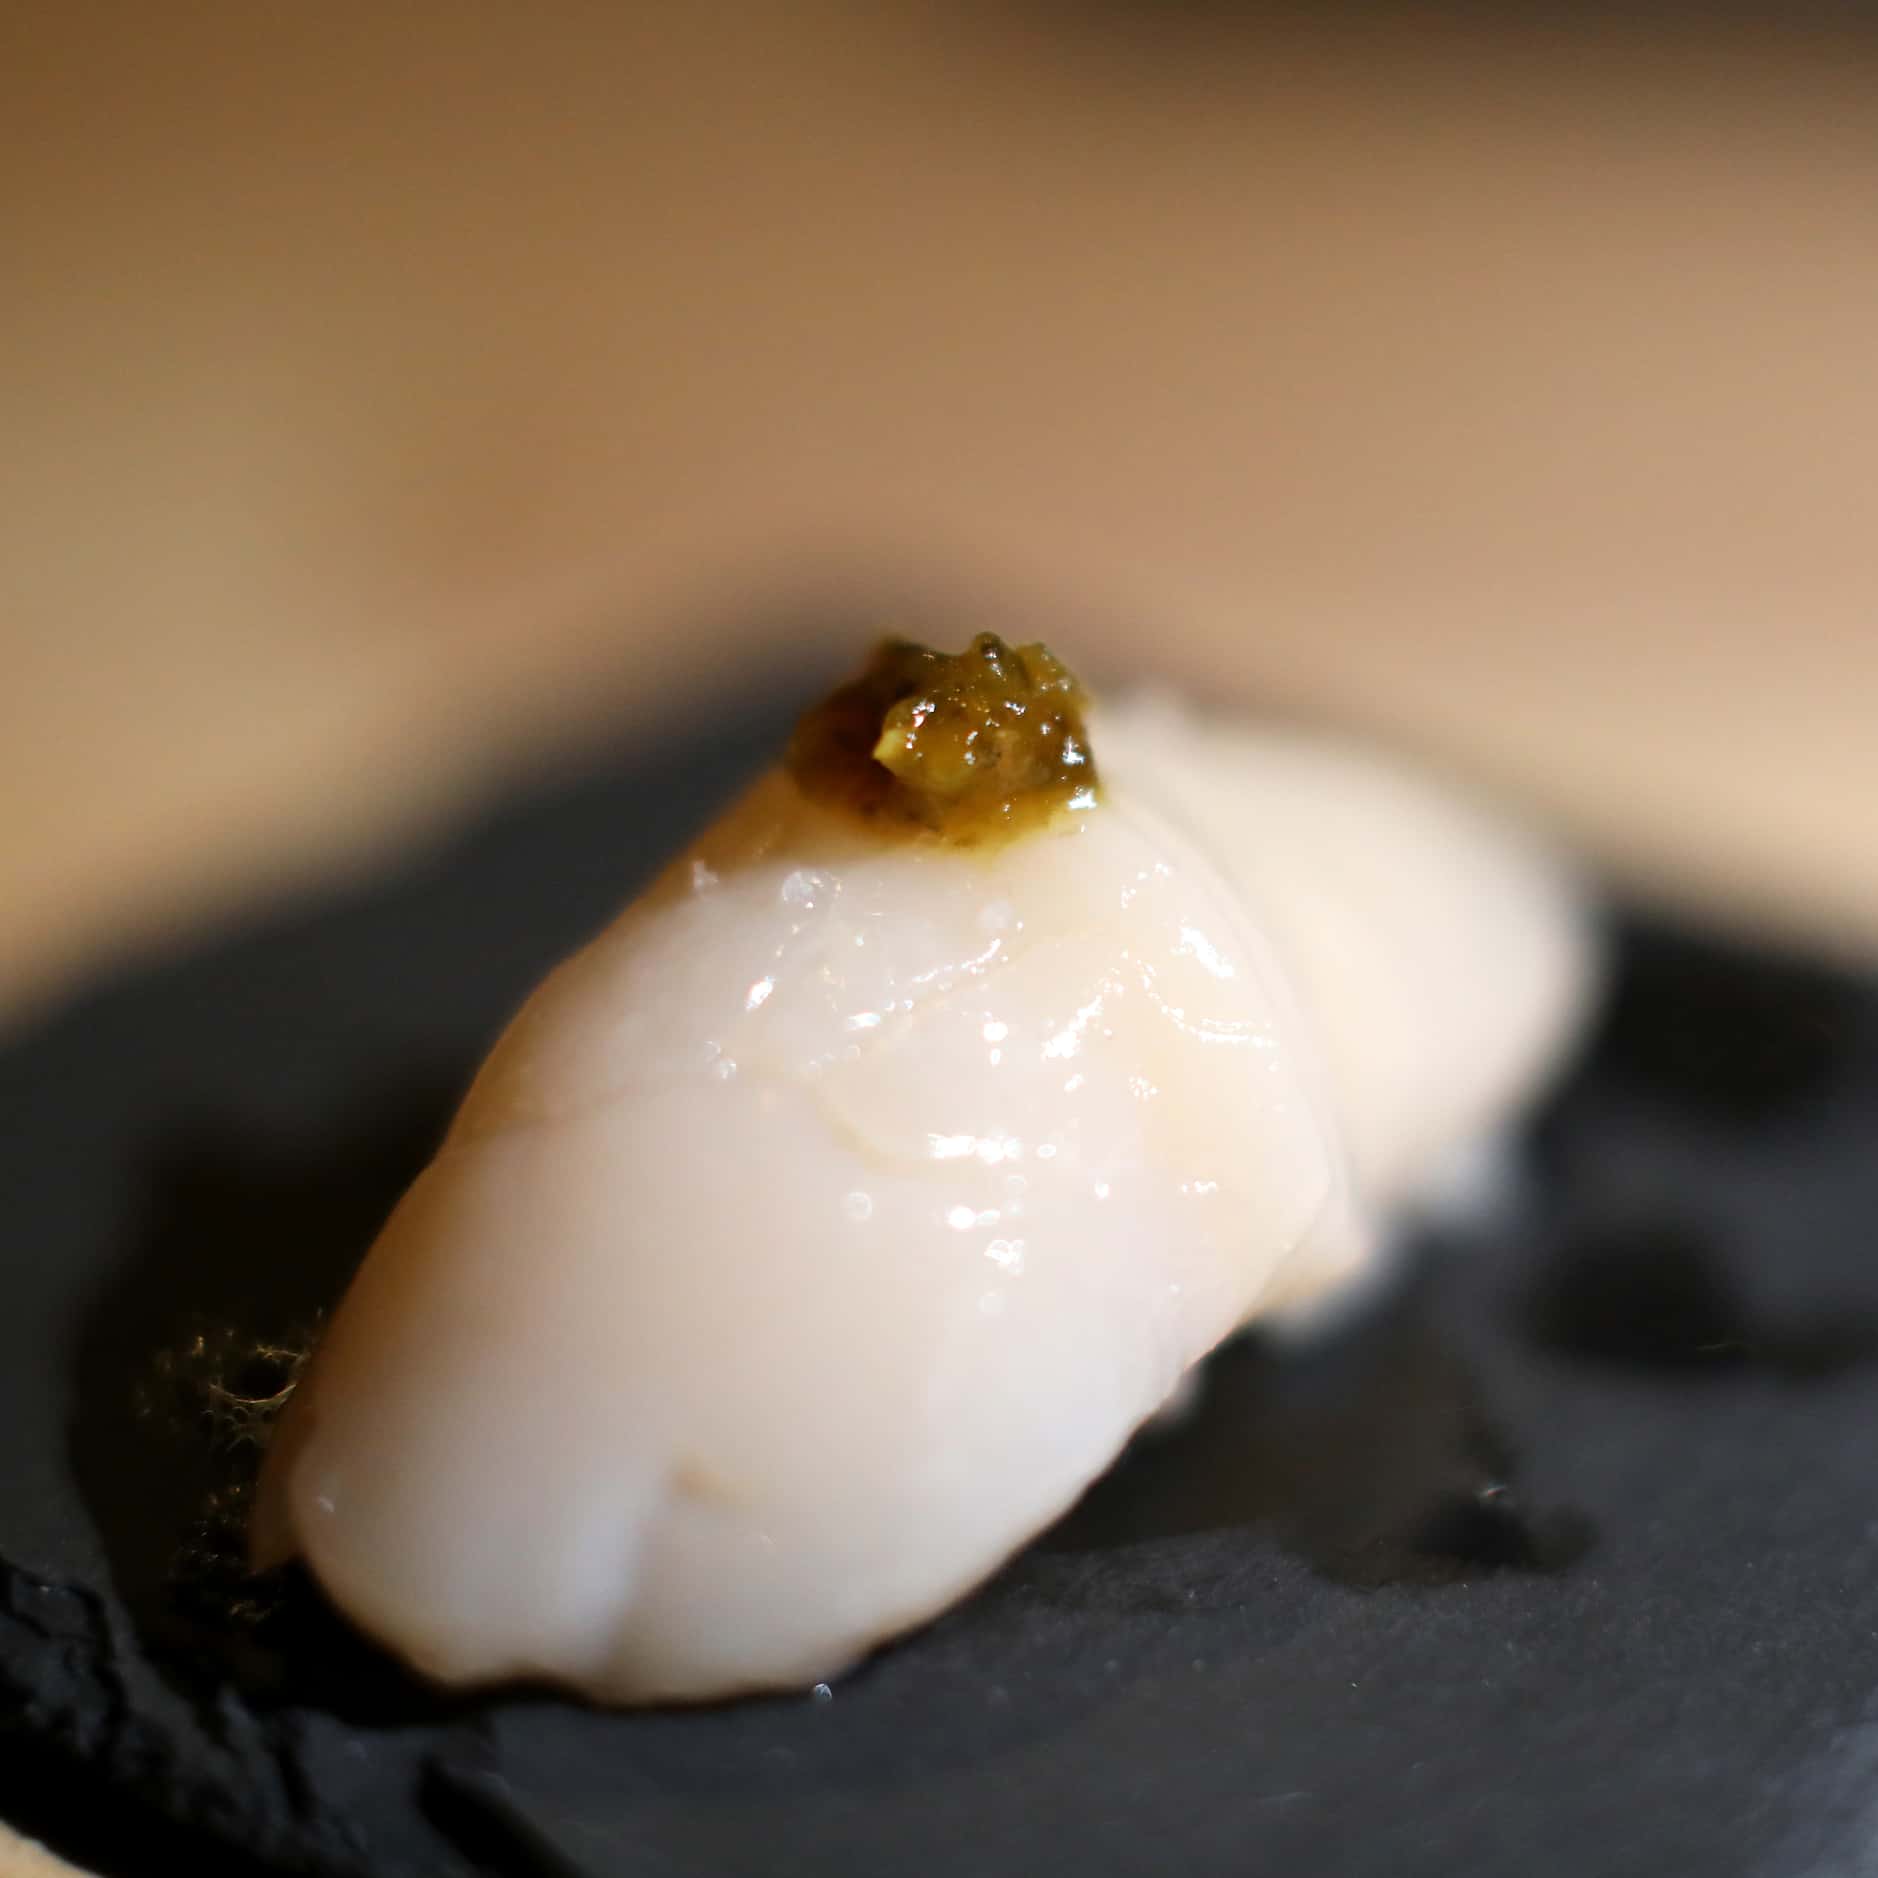 The Scallop at Sushi By Scratch, a secret pop-up restaurant on the eighth floor of The...